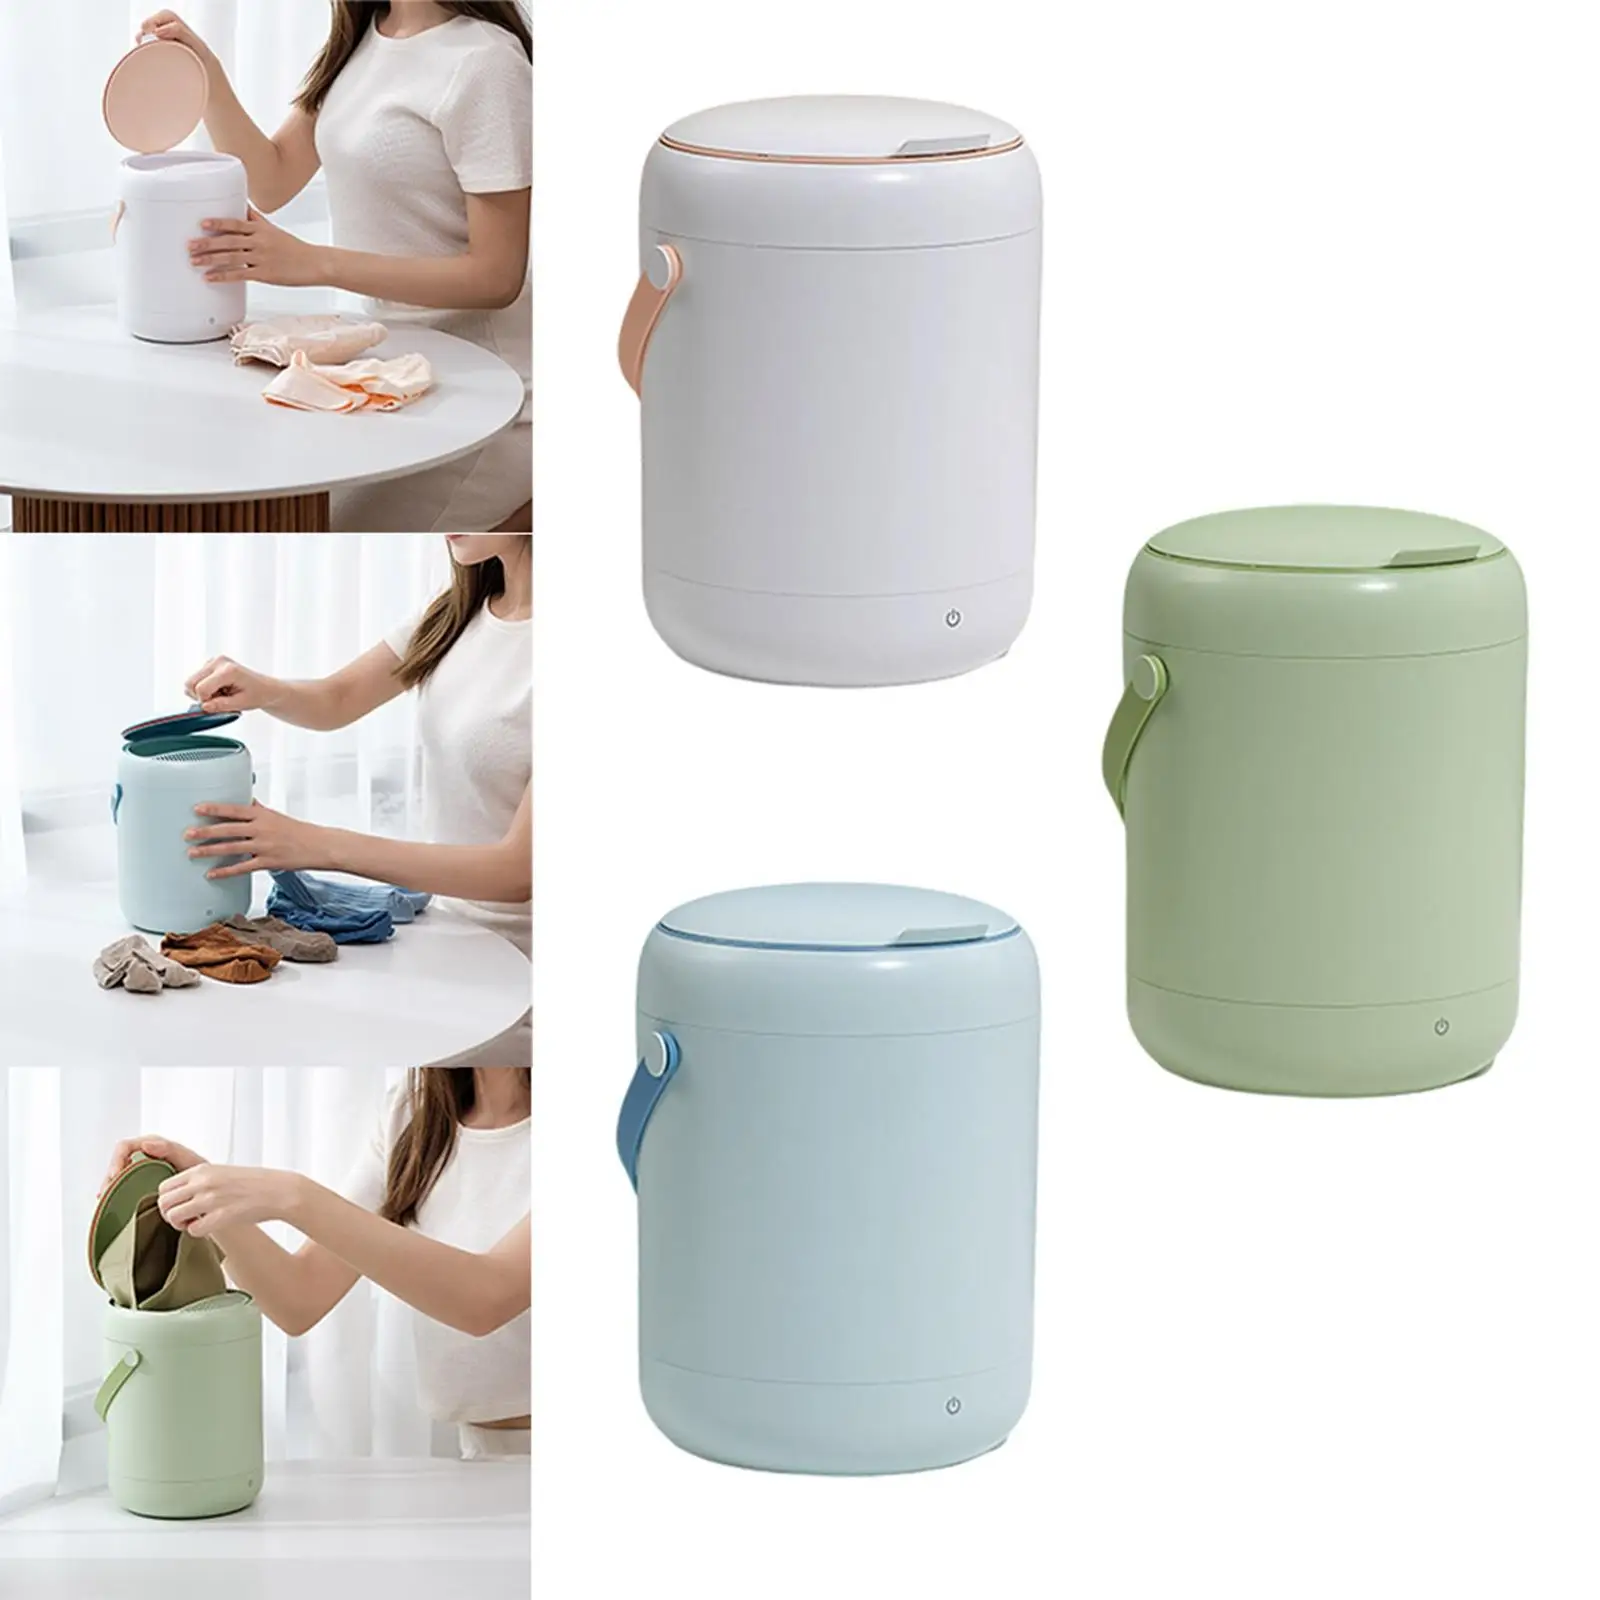 Portable Mini Washing Machine Energy & Water Saving Electric Laundry Tub for Apartment Dorm Home Use Travelling Business Trip